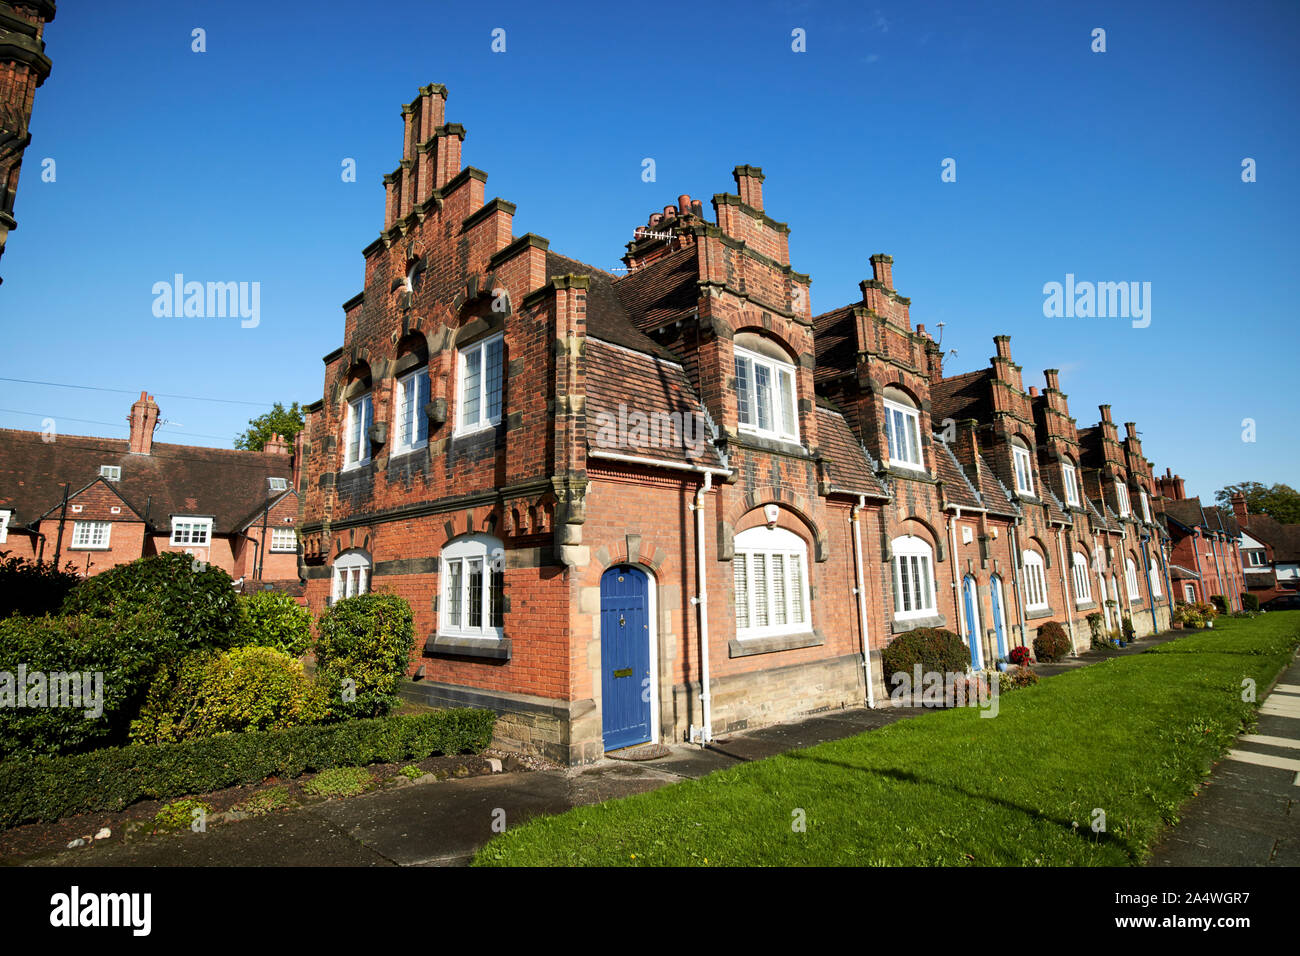 37-47 wood street terraced houses by grayson and ould Port Sunlight England UK Stock Photo